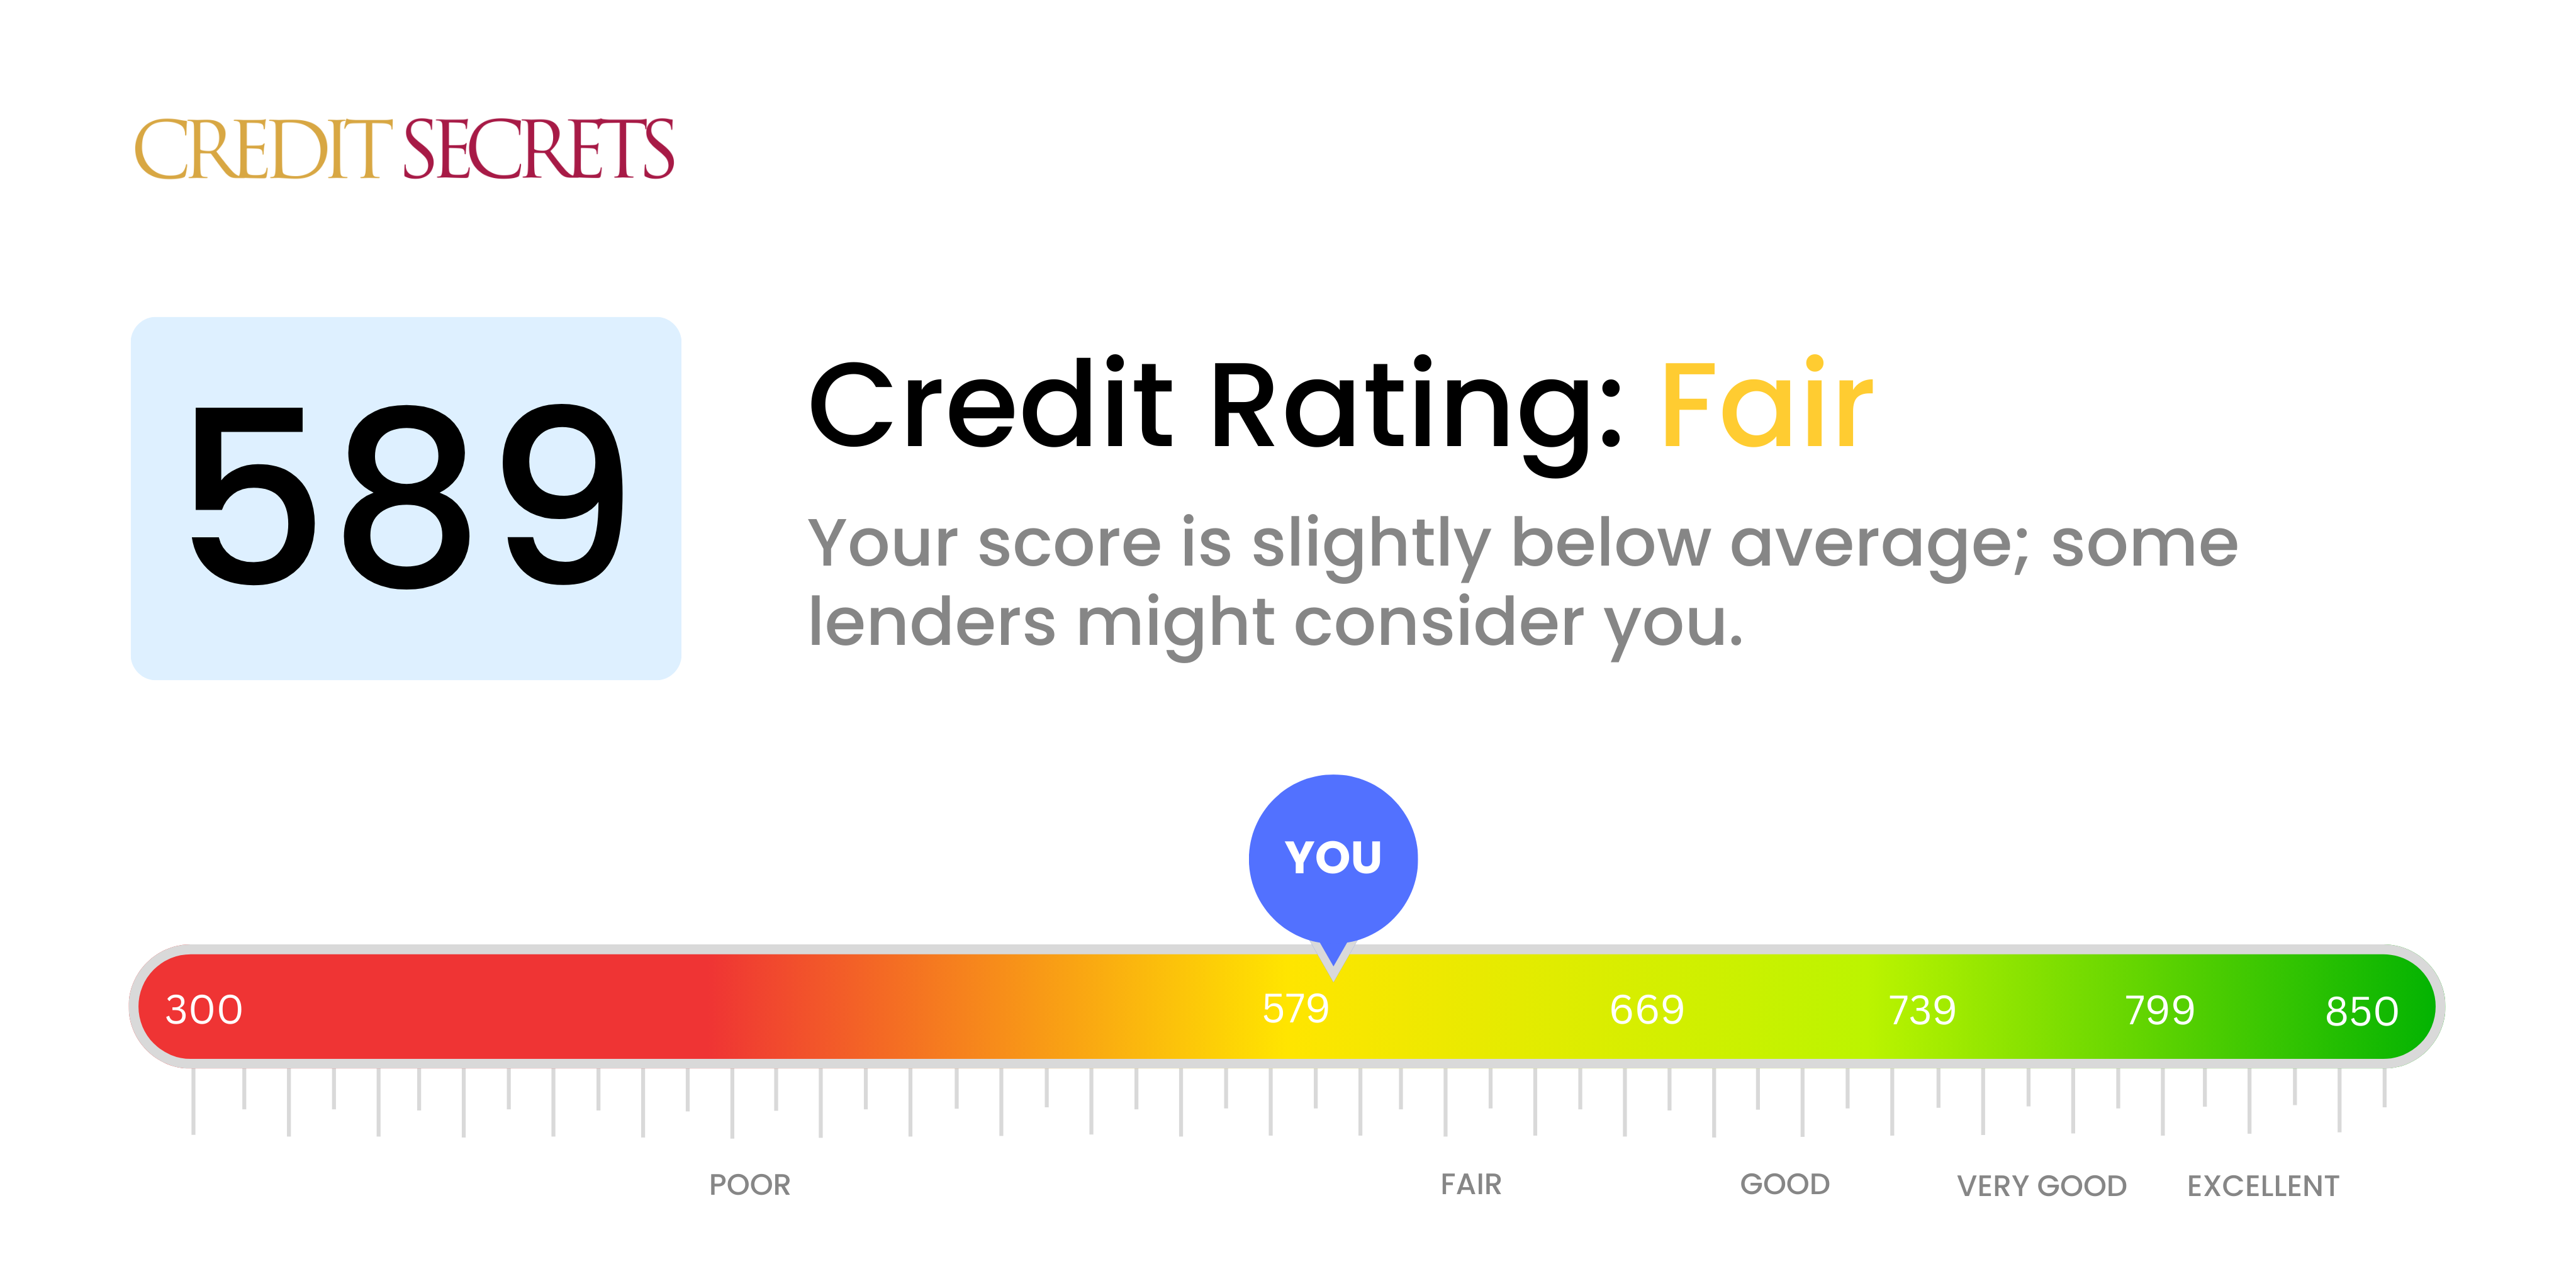 Is 589 a good credit score?